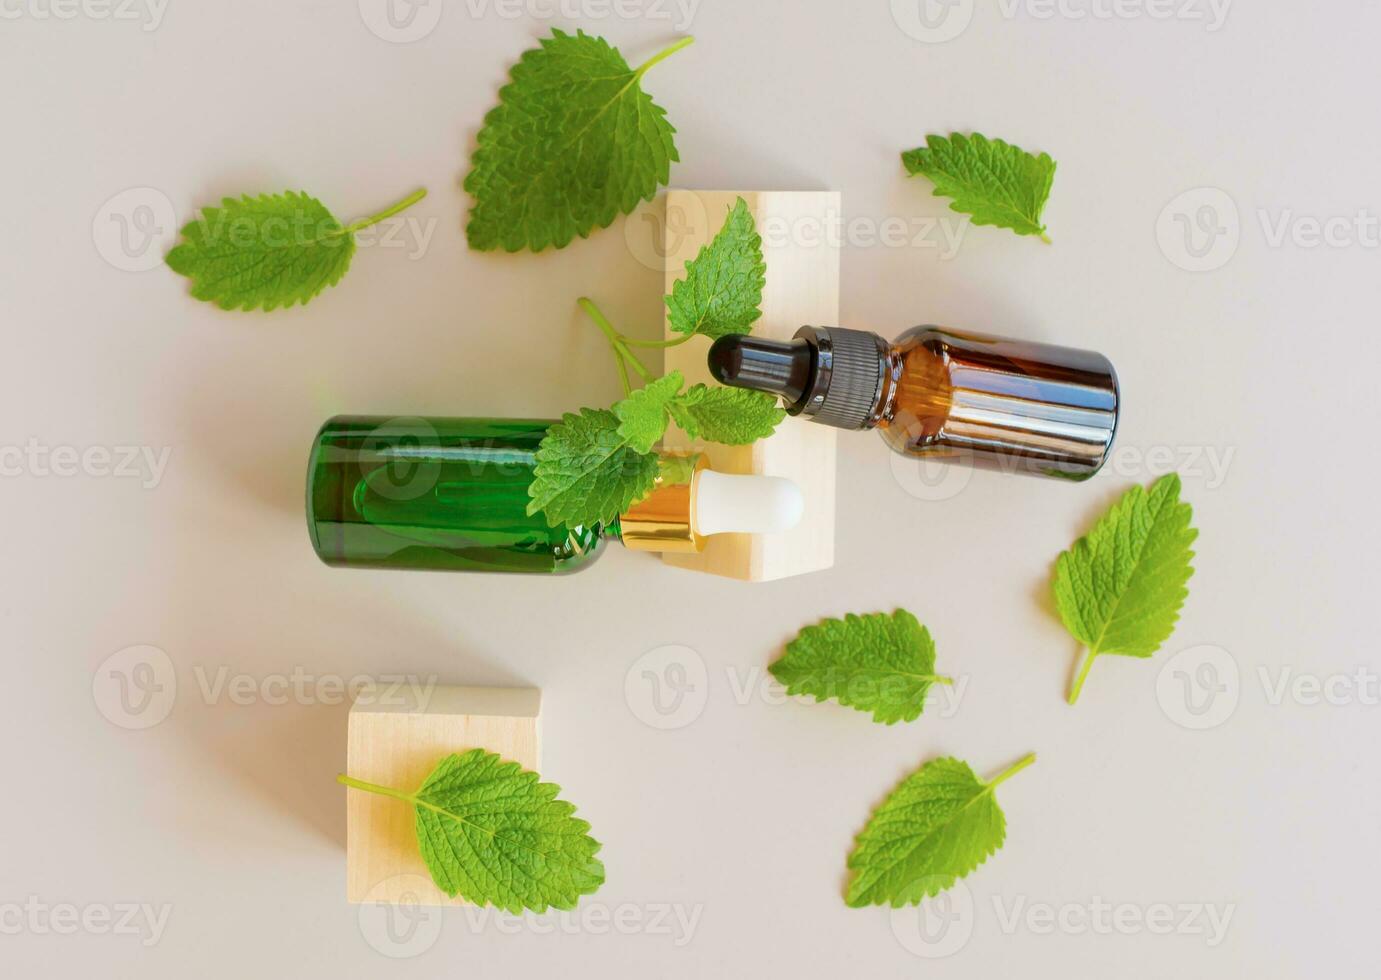 Top view of fresh green mint or spearmint leaves and glass dropper bottles of mint essential oil on gray background. Natural herbal medical aromatic plant concept. photo